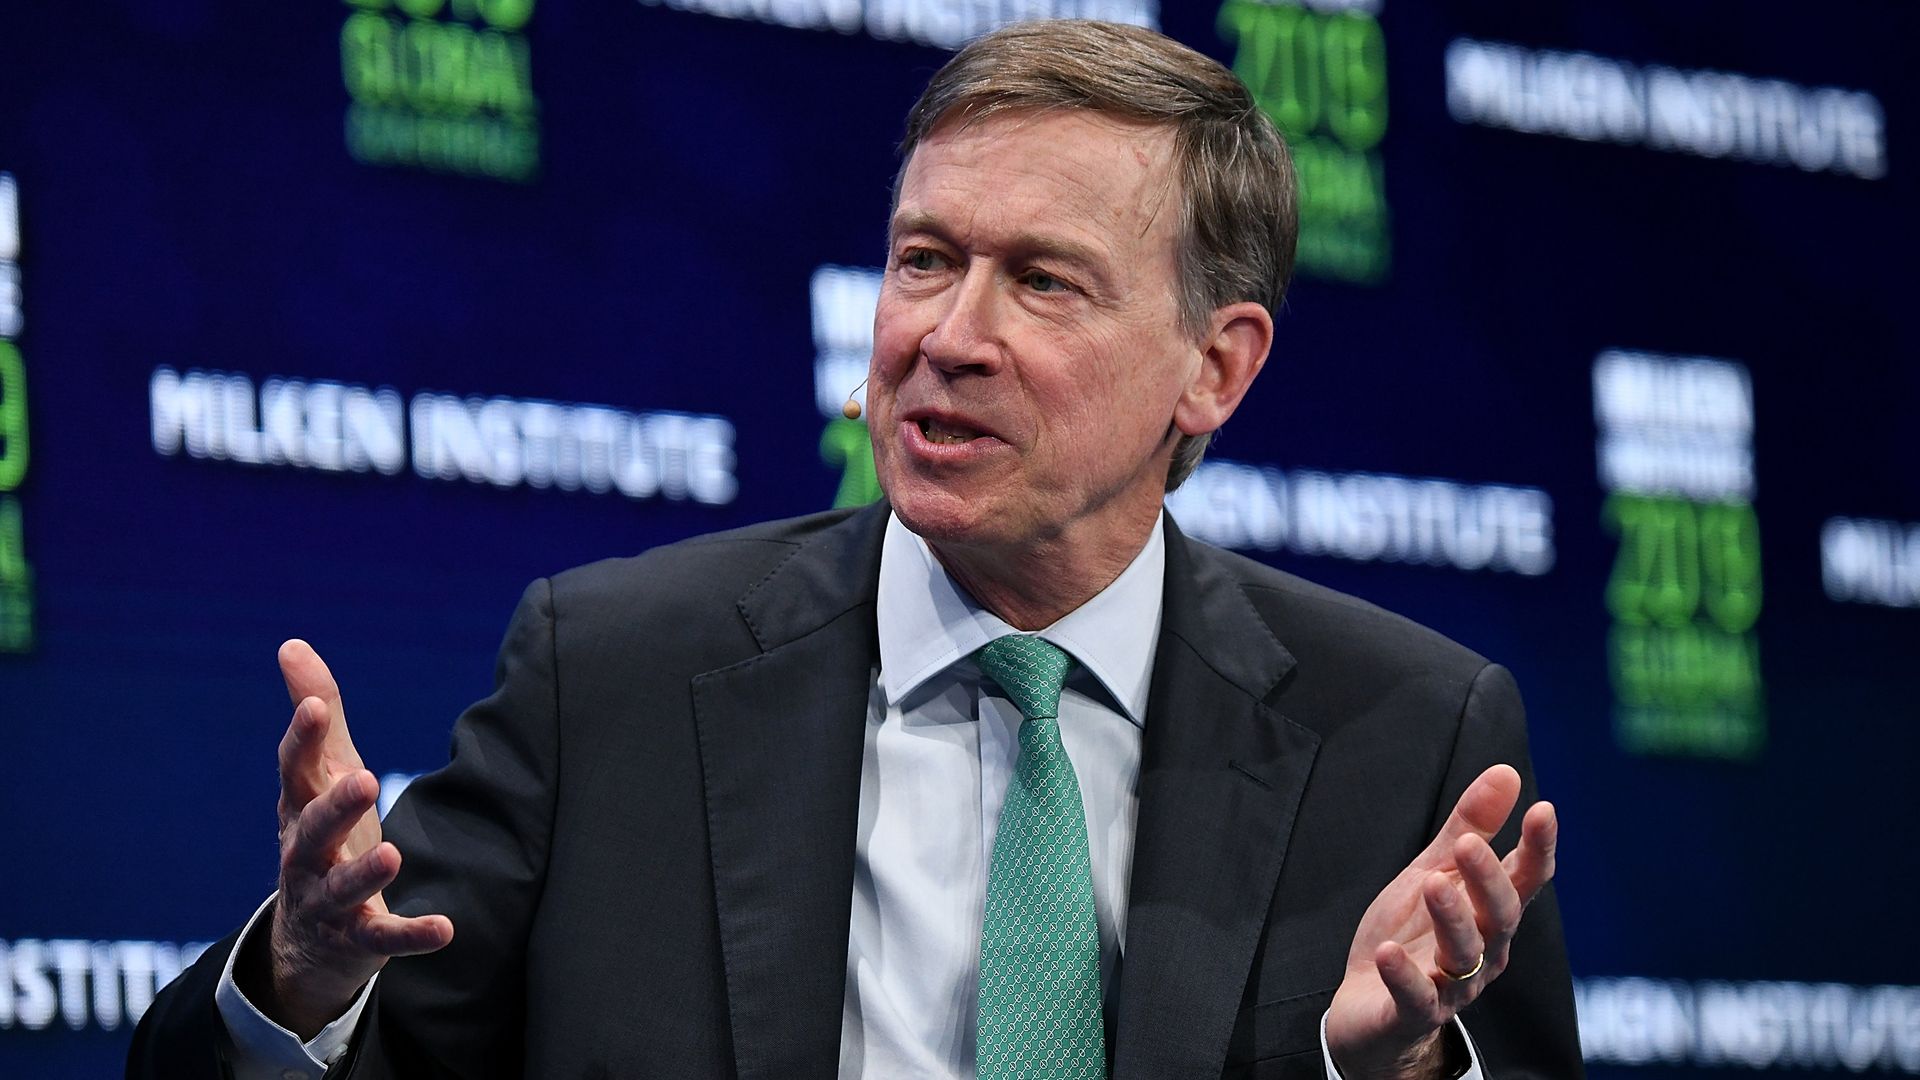 John Hickenlooper gestures during a panel discussion in California.